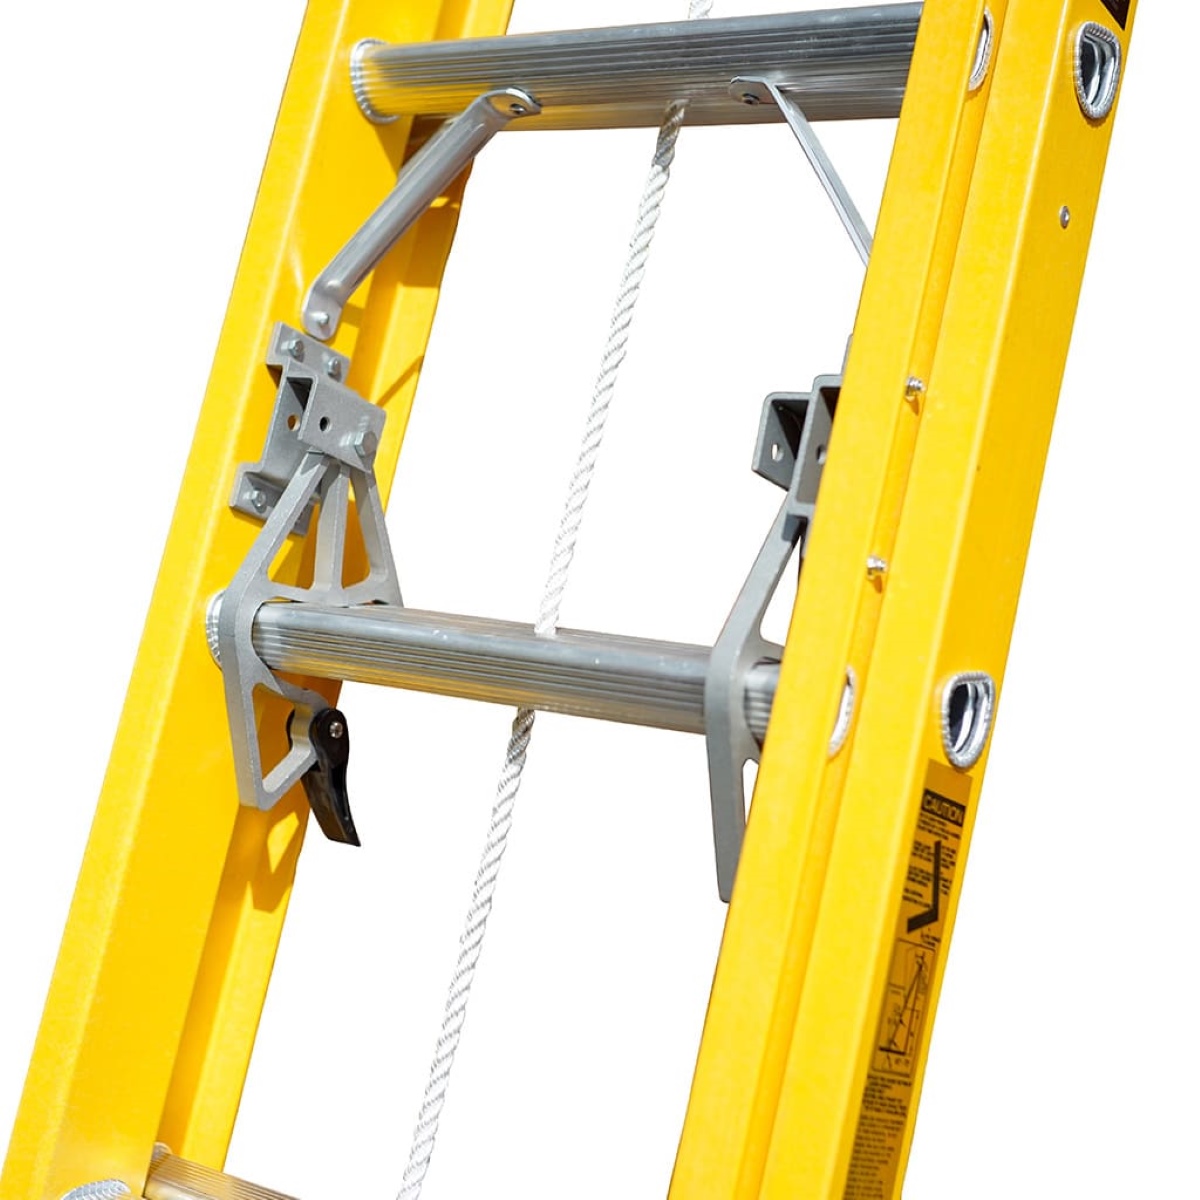 How To Use Rope On Extension Ladder